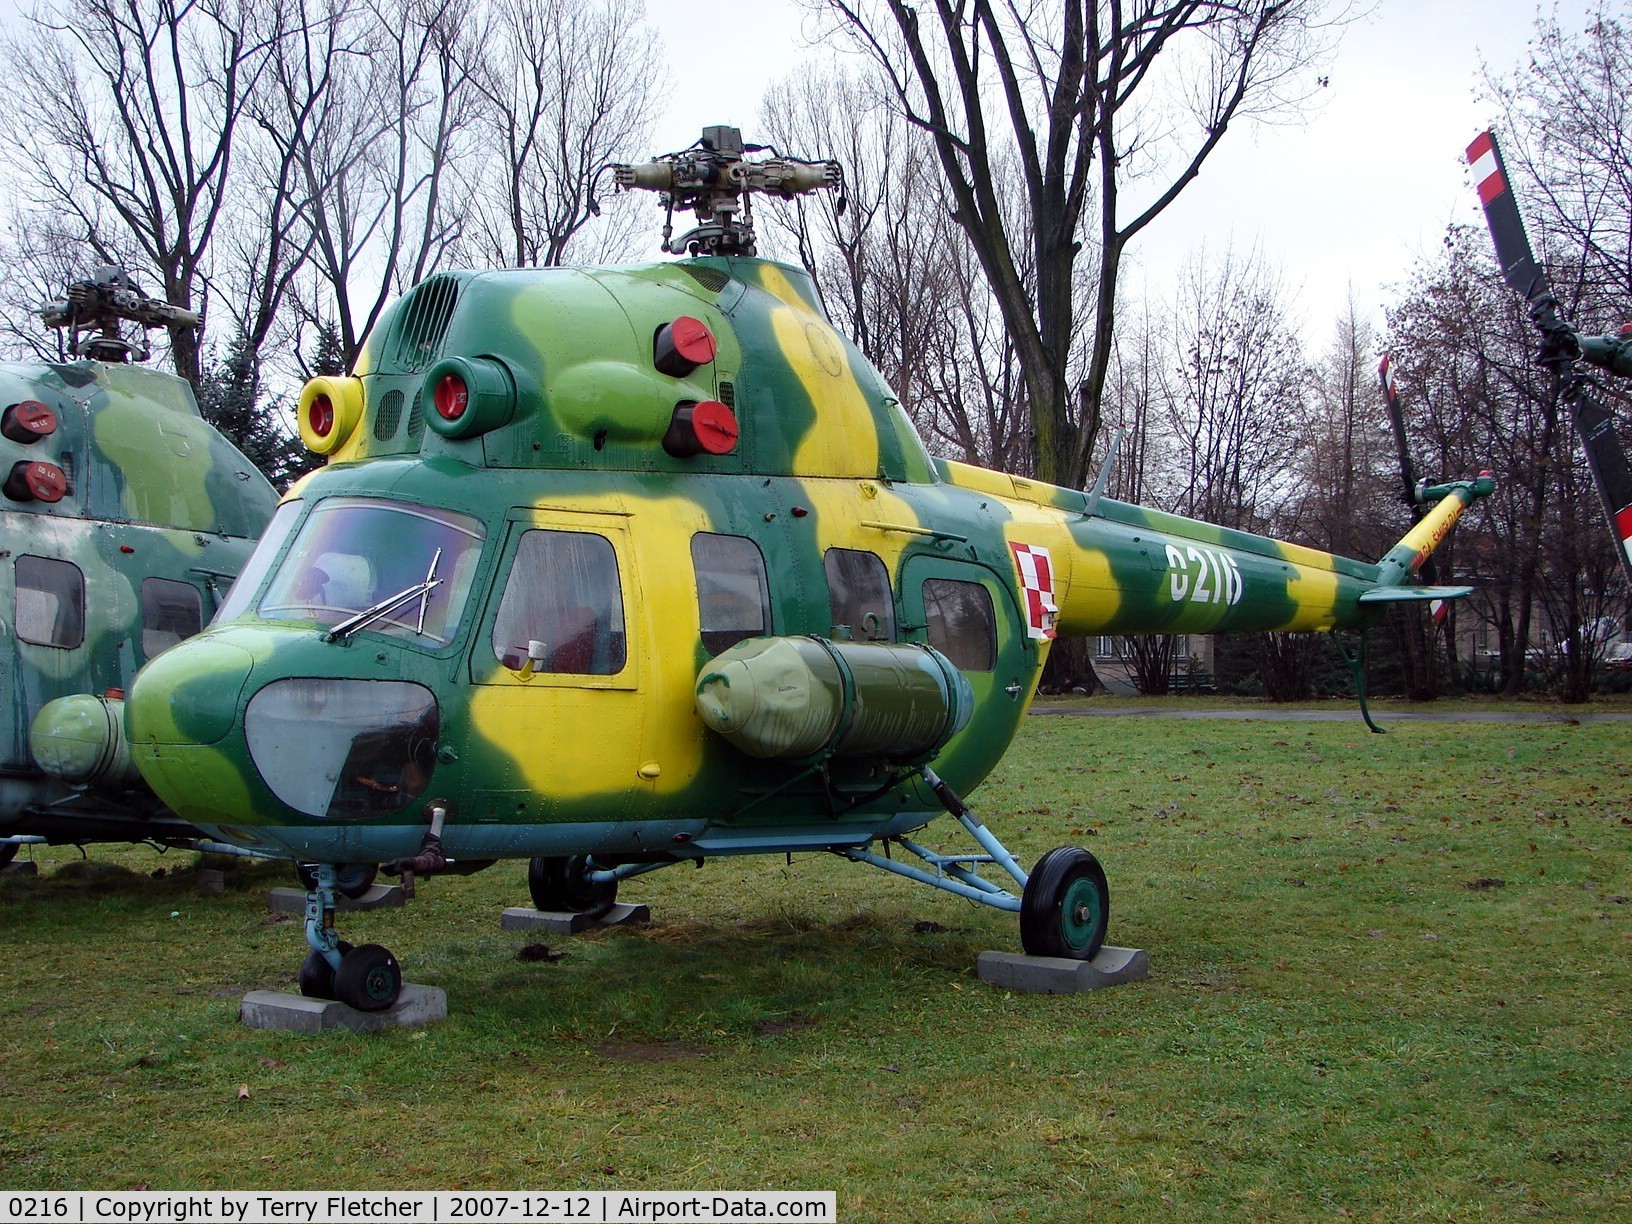 0216, 1967 PZL-Swidnik Mi-2T Hoplite C/N 530216116, This Mil Mi-2T c/n 530216116 is preserved at the Poland Aviation Museum in Krakow